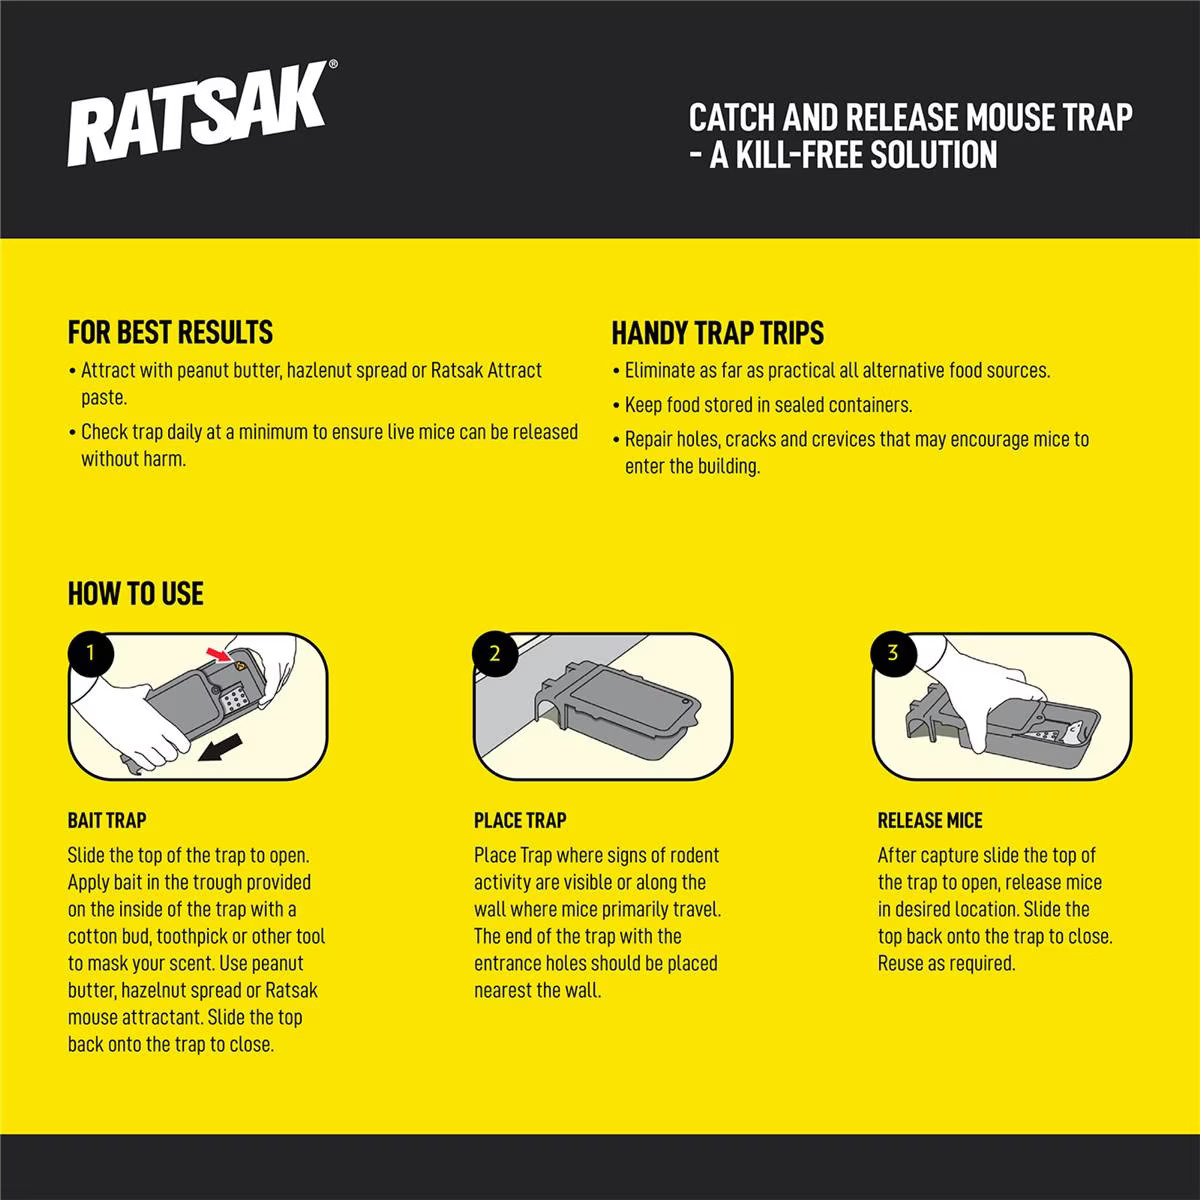 RATSAK Catch and Hold Mouse Trap